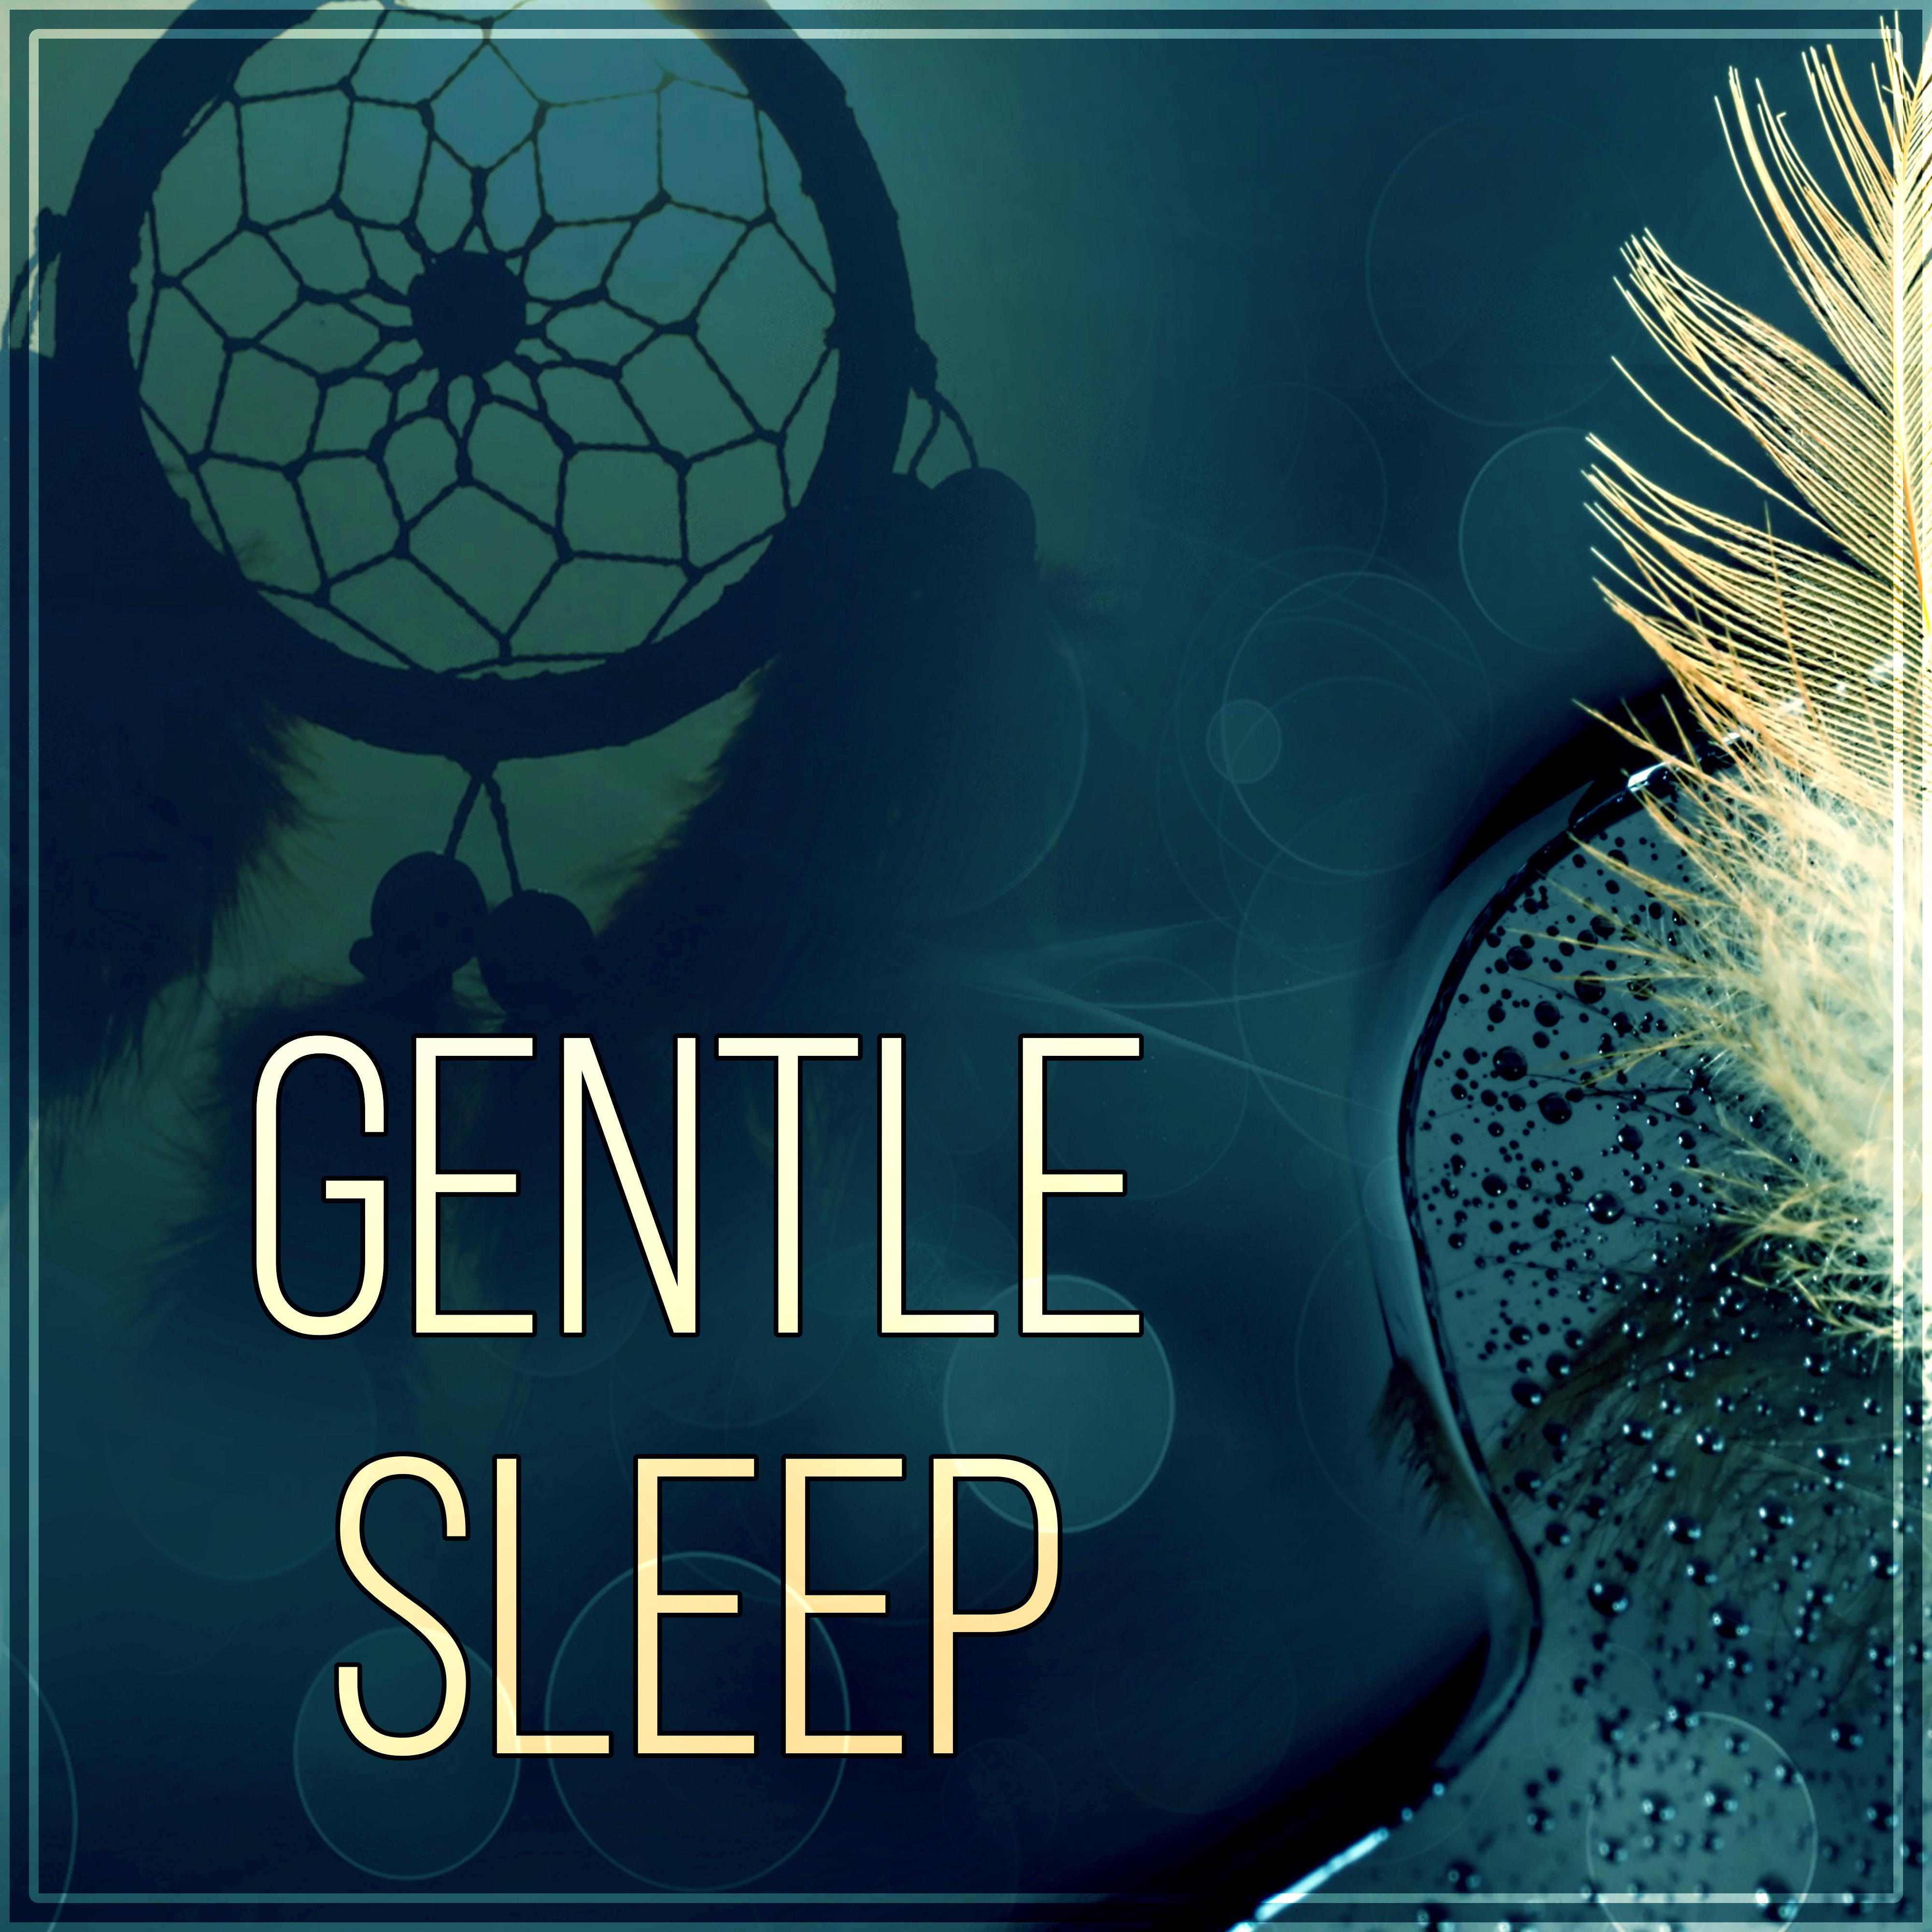 Gentle Sleep - Sounds of Nature, Deep Sleep, Healing Massage, Restful Sleep and Relieving Insomnia, Lullabies for Relaxation, White Noise